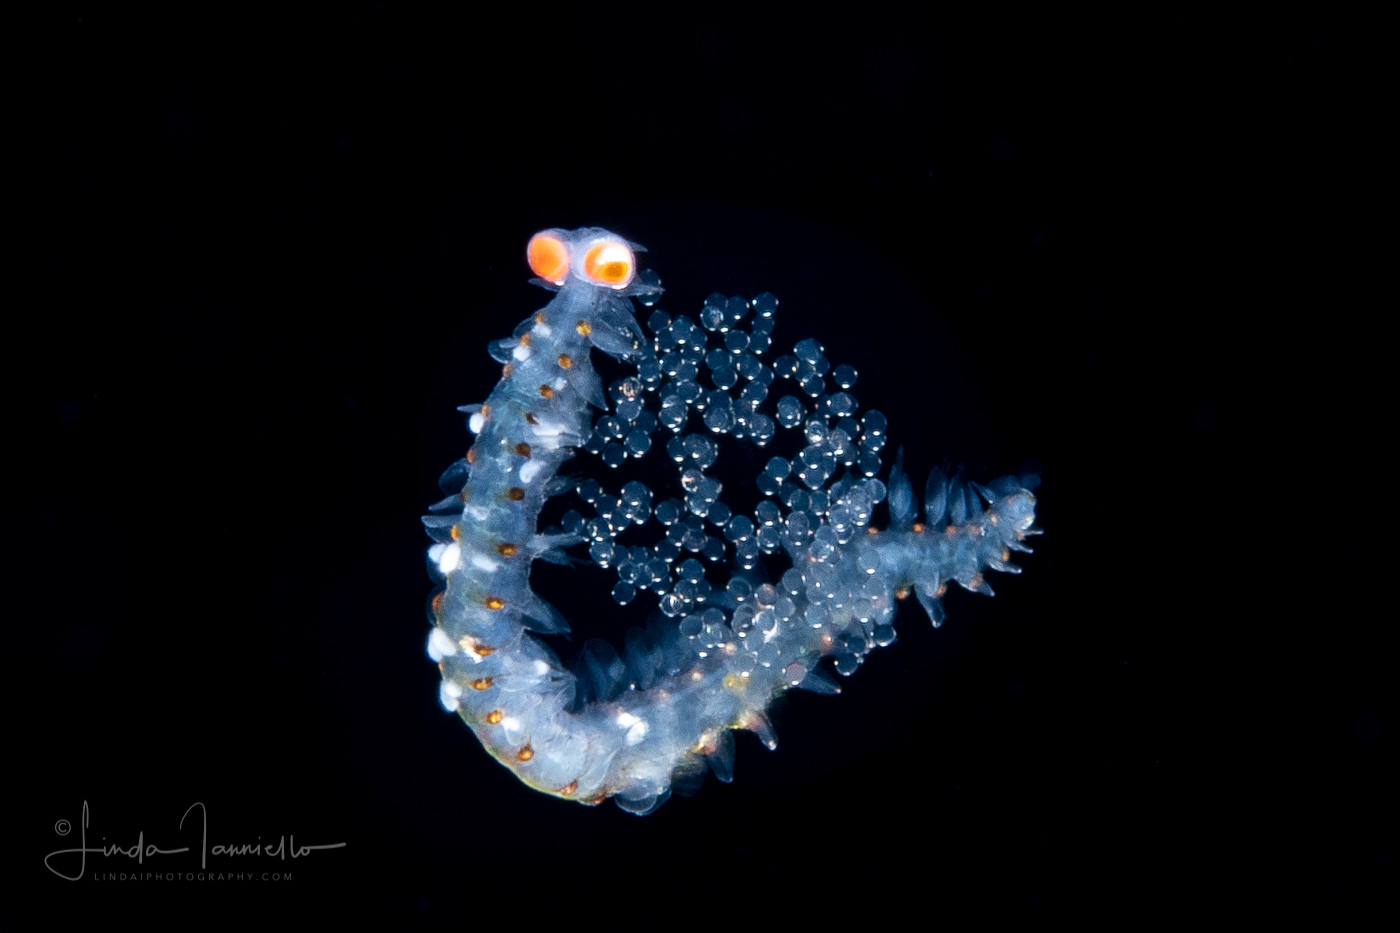 Pelagic Worm - Alciopidae Family - Unknown behavior - Possibly eating sea angel eggs (Pteropoda) or brooding its own eggs